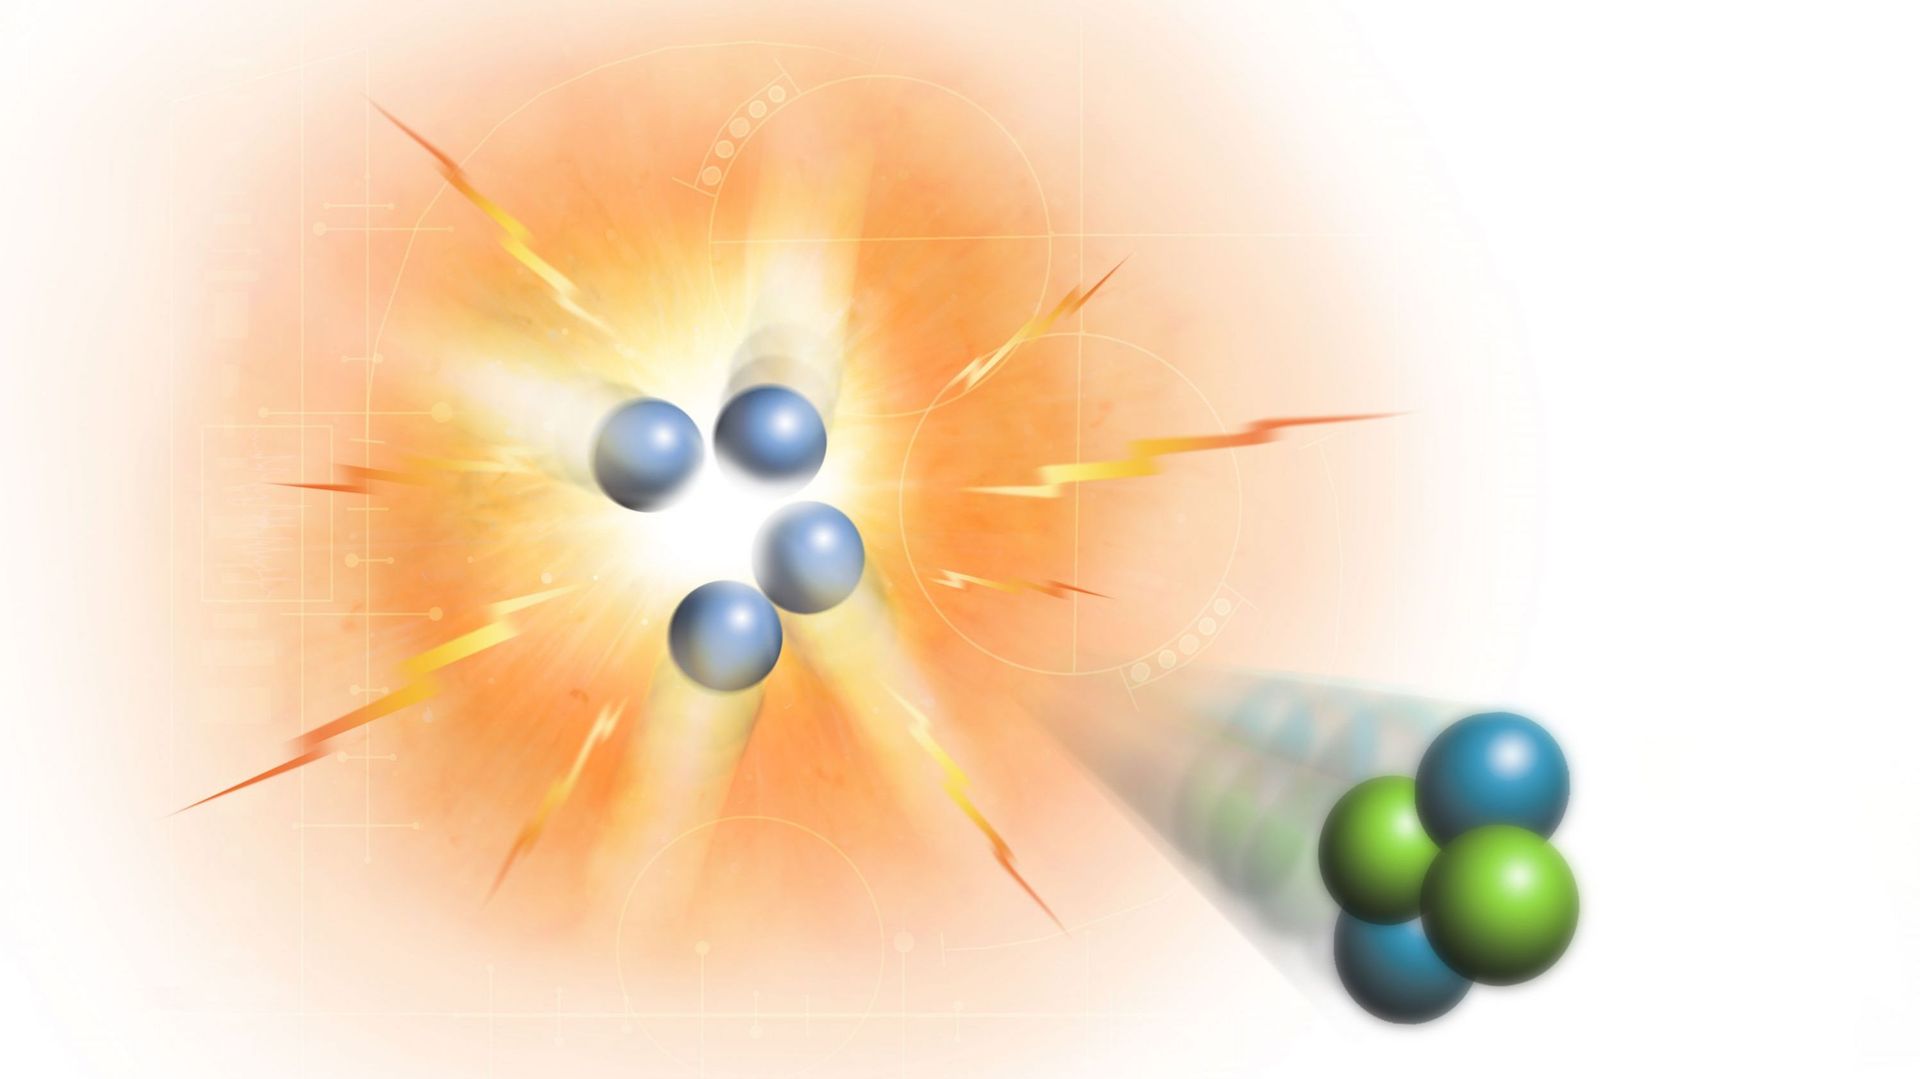 Artwork of nuclear fusion reaction